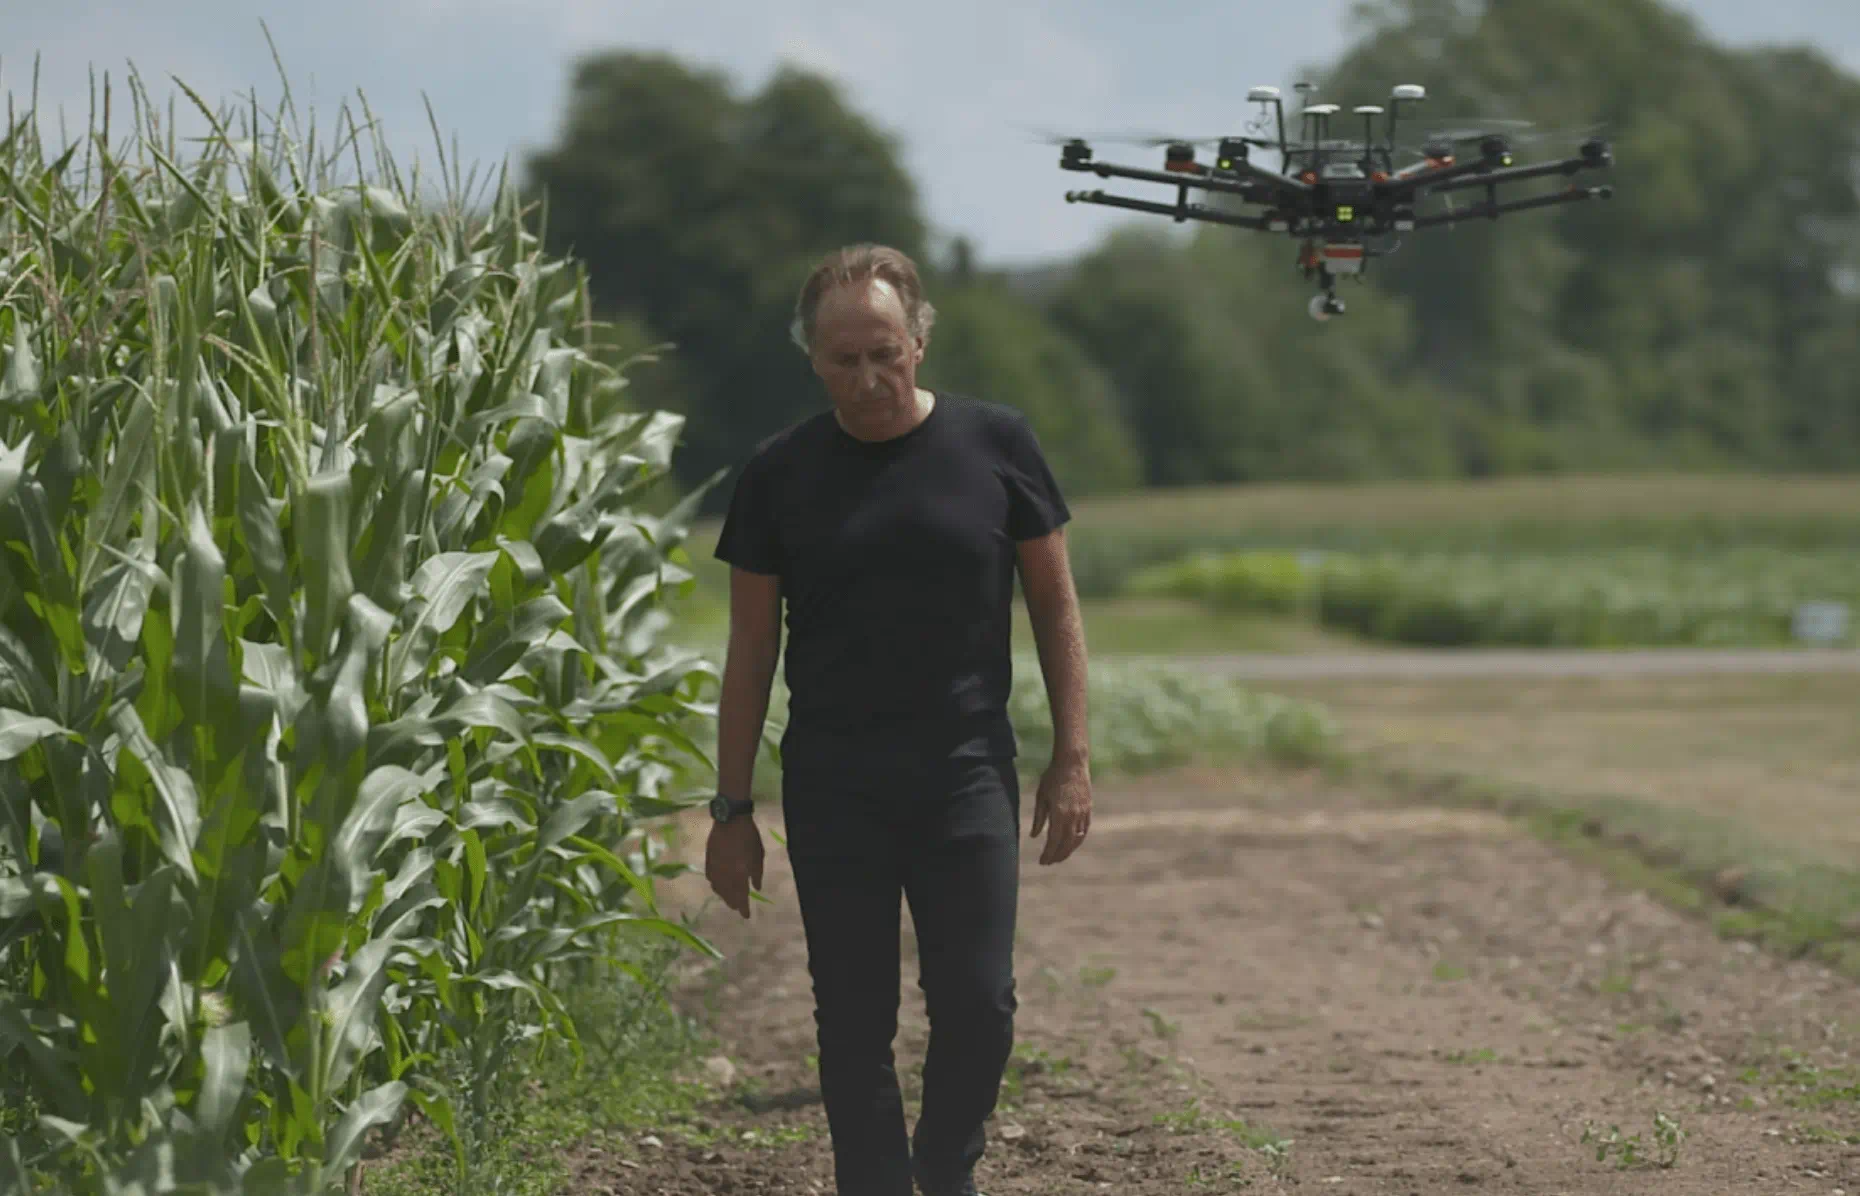 Bruno Basso, an MSU Foundation Professor, walks along a soil path in the center of a photo. A field of green grains grows to his left and a small drone with several rotors flying to his right in the foreground.